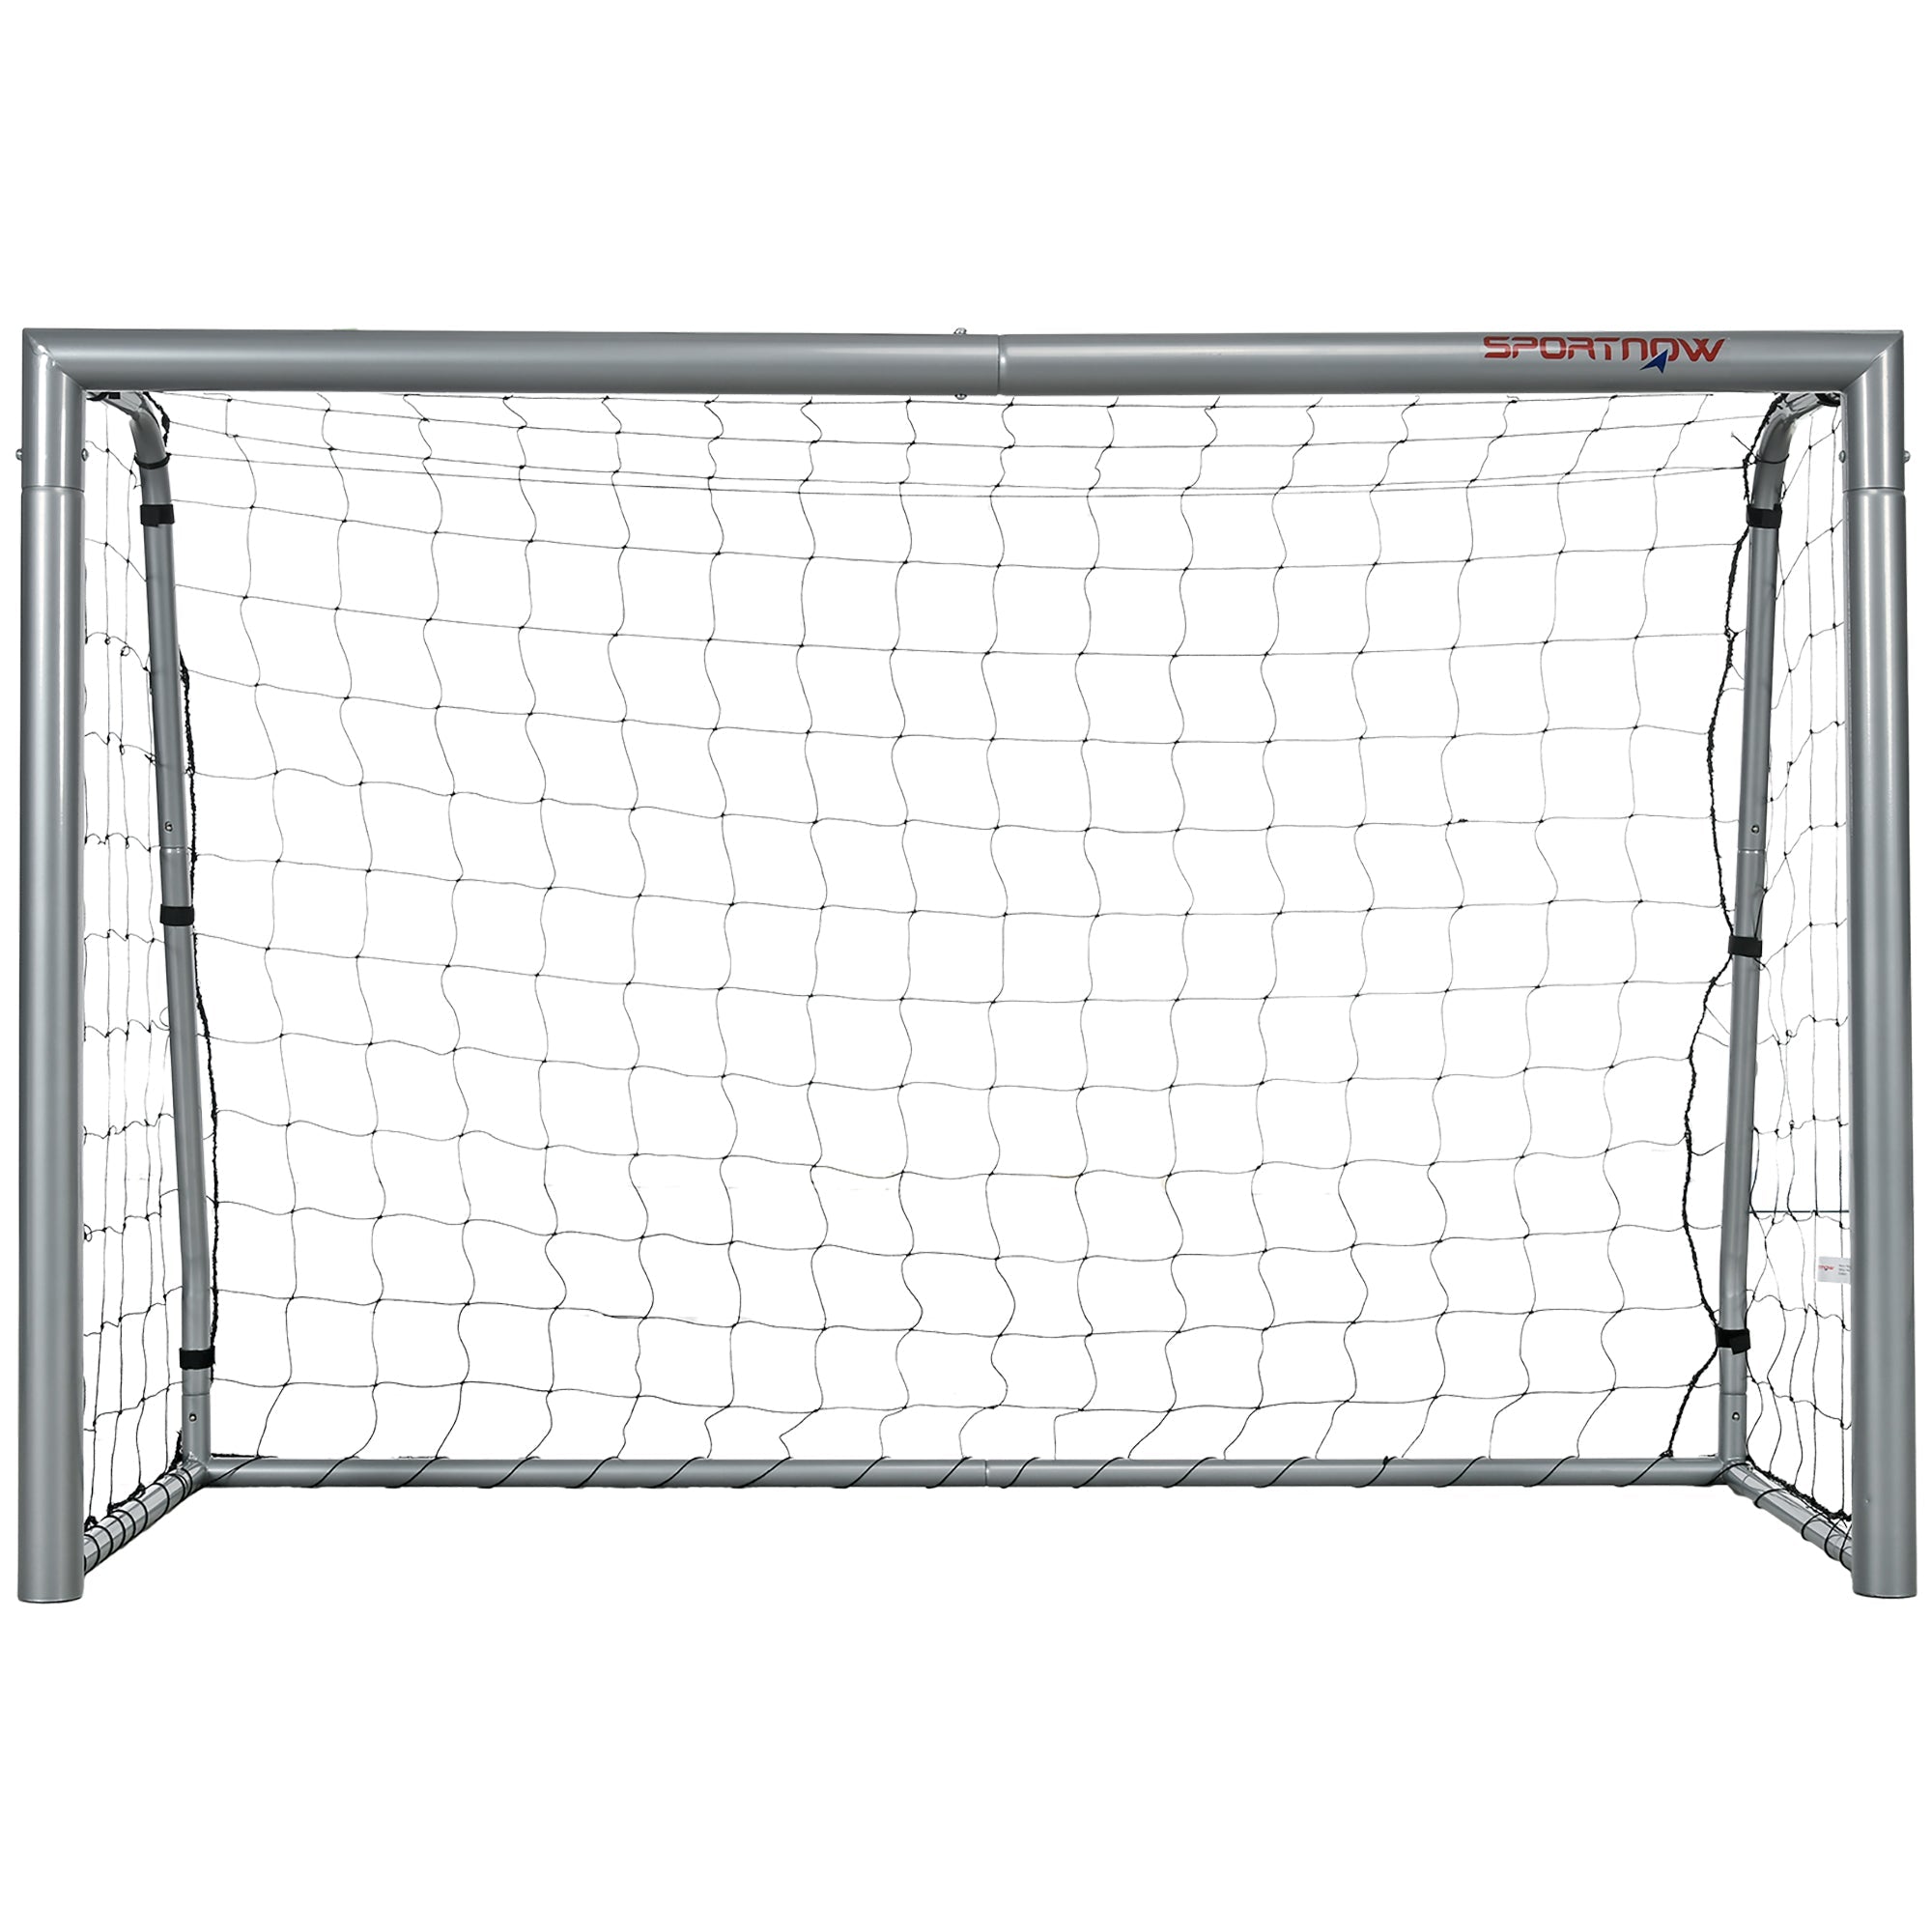 6ft x 2ft Football Goal, Football Net for Garden with Ground Stakes, Quick and Simple Set Up-0